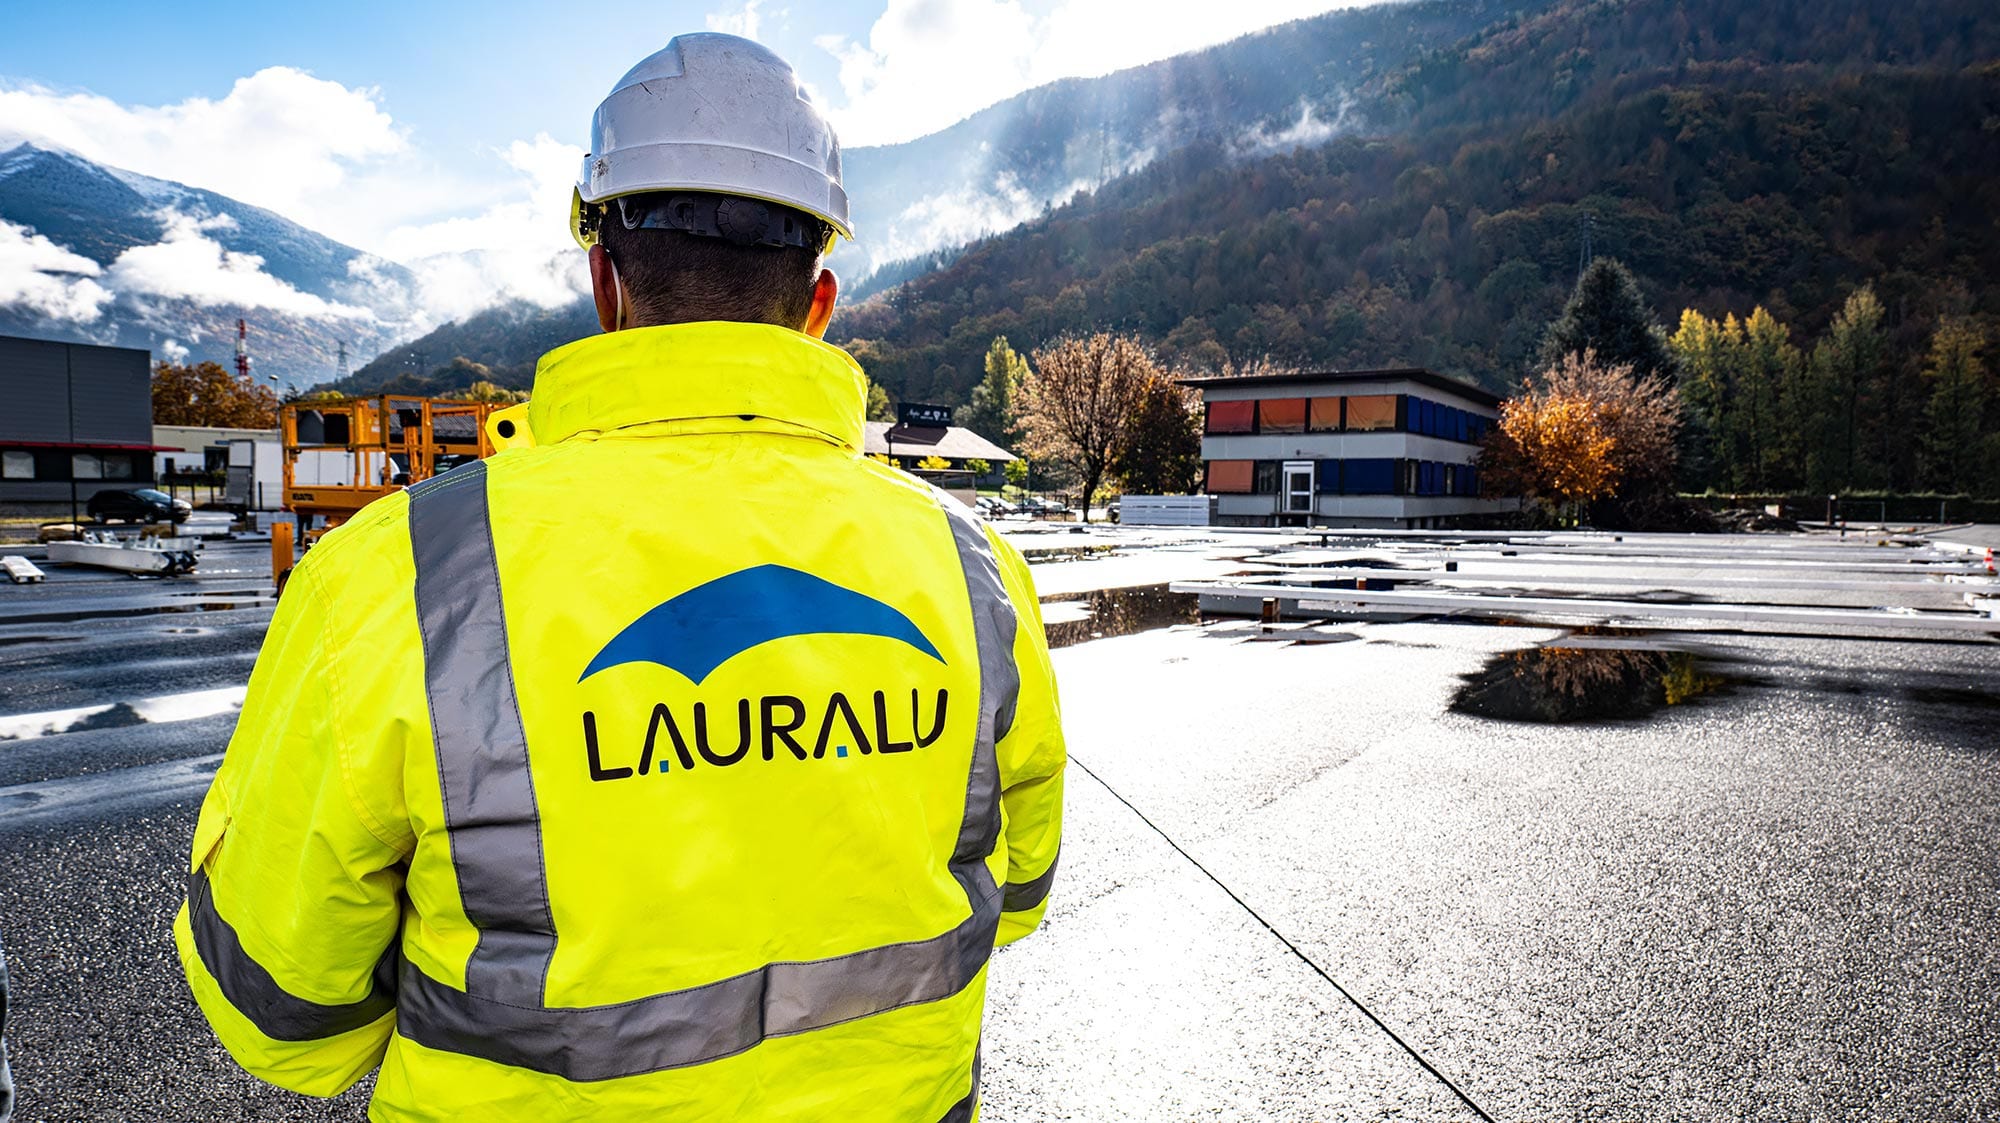 Lauralu building manufacturer careers and employee safety